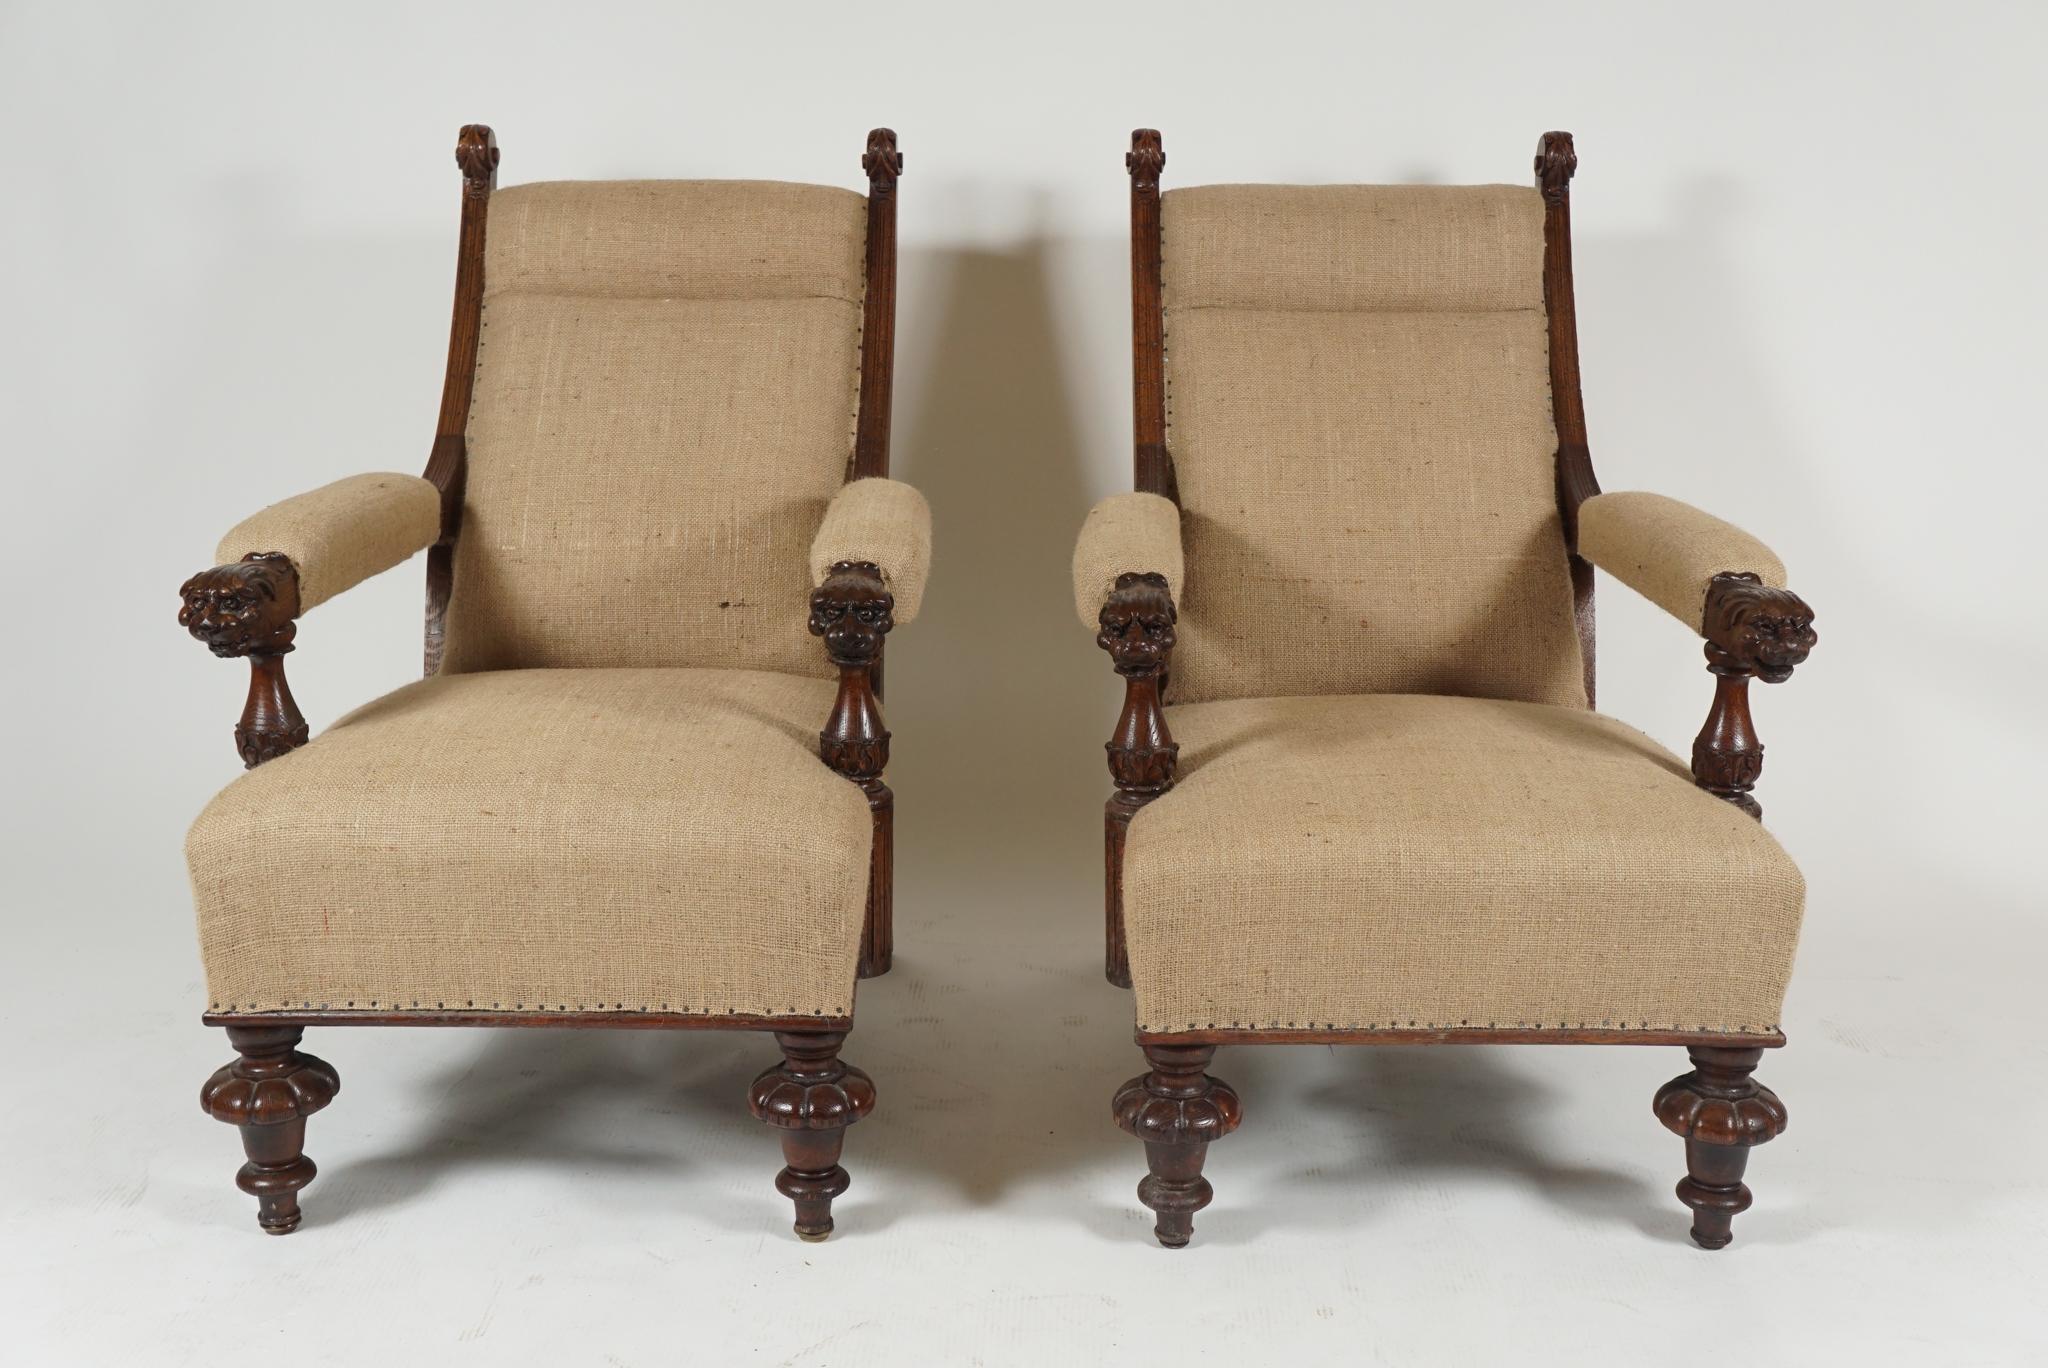 Pair of late 19th century oak library armchairs with arms terminating in lion head carvings and turned legs in walnut. 
The chairs newly upholstered in a textured burlap fabric.
 